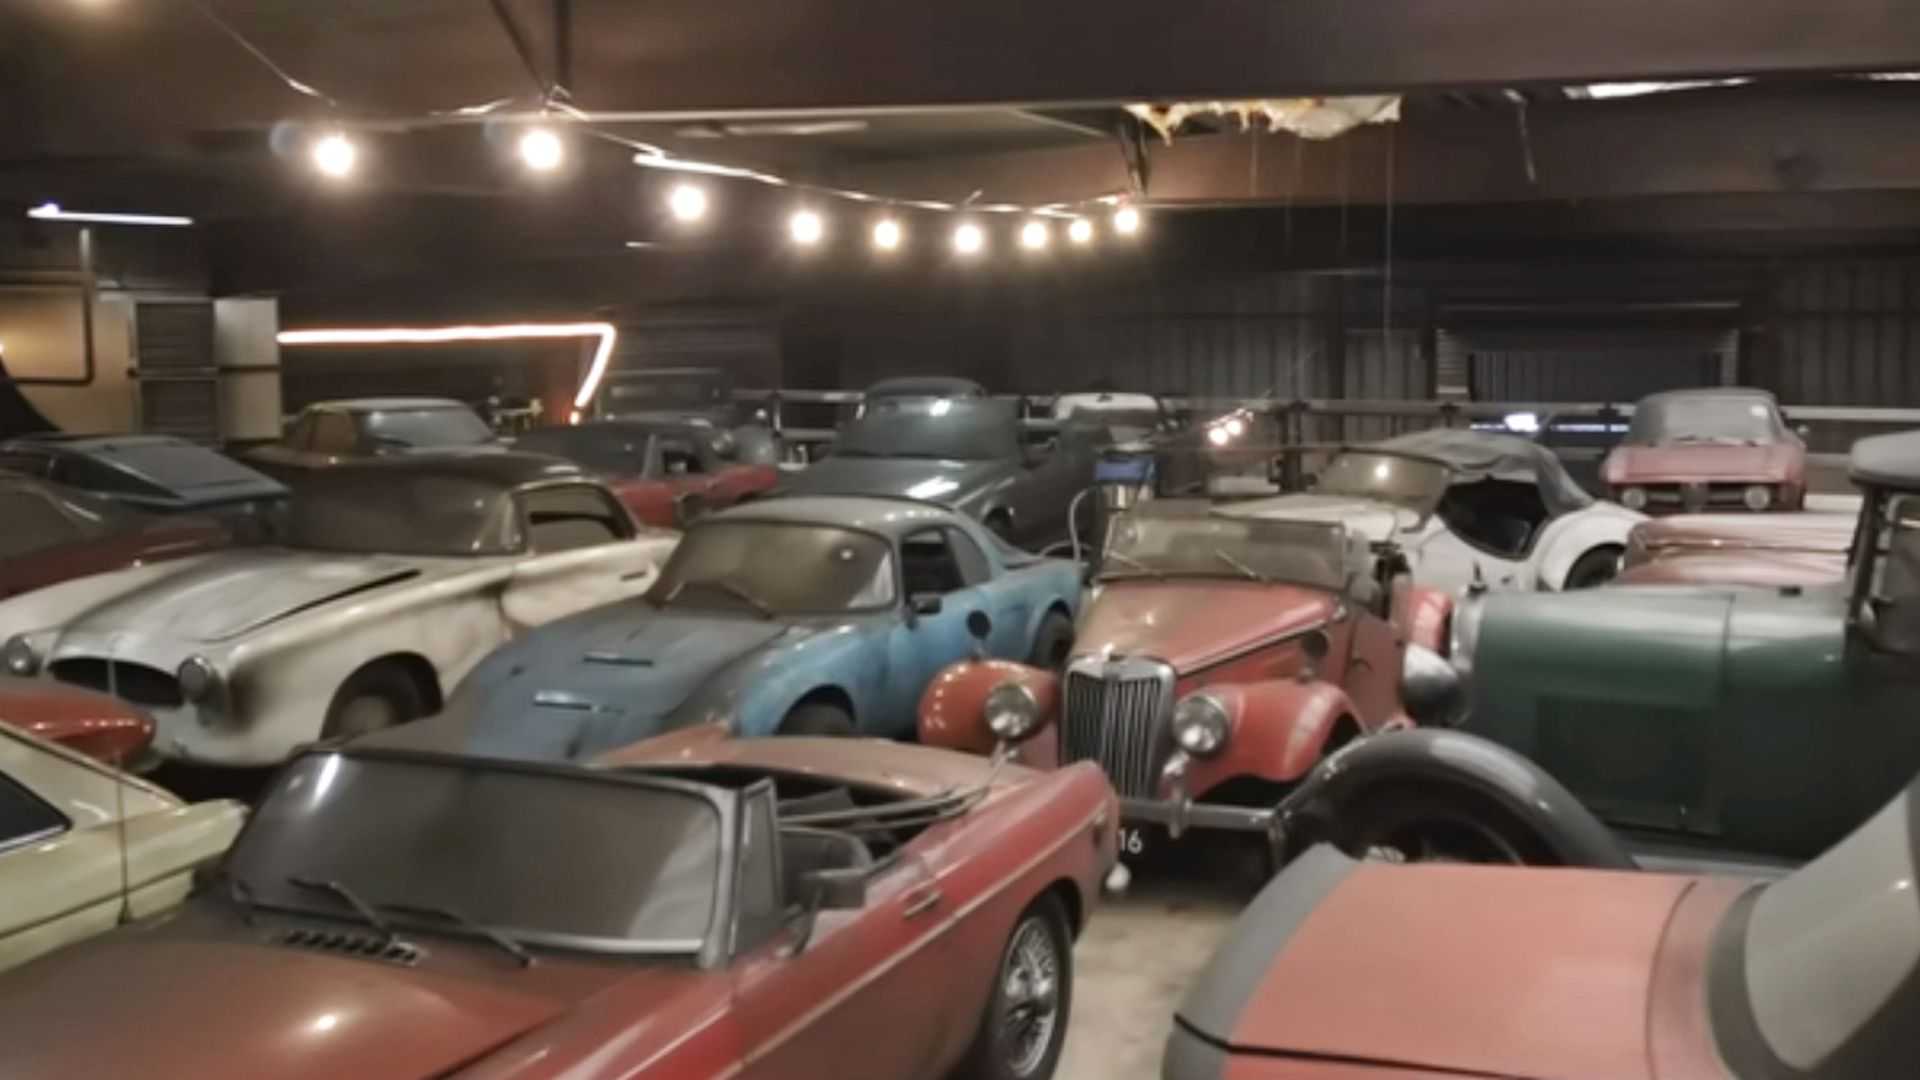 Incredible 230-Car Barn Find In The Netherlands Classic Ferraris, Jaguars, BMWs And More